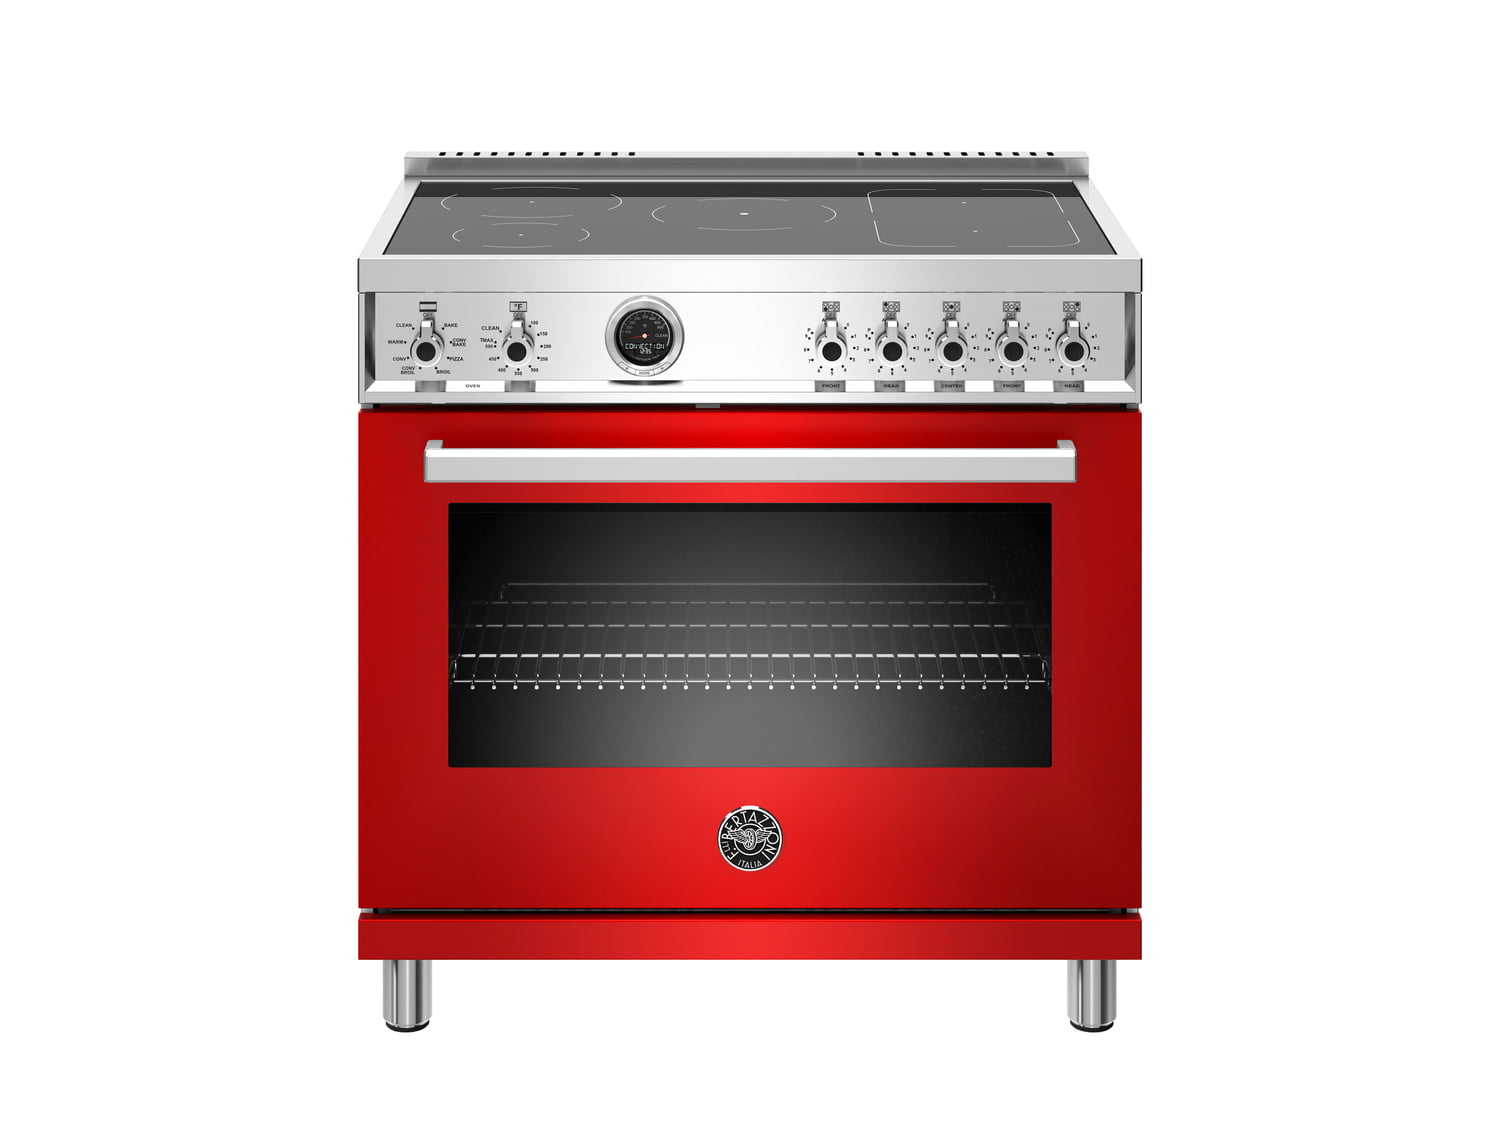 Bertazzoni PROF365INSROT 36 Inch Induction Range, 5 Heating Zones, Electric Self-Clean Oven Rosso